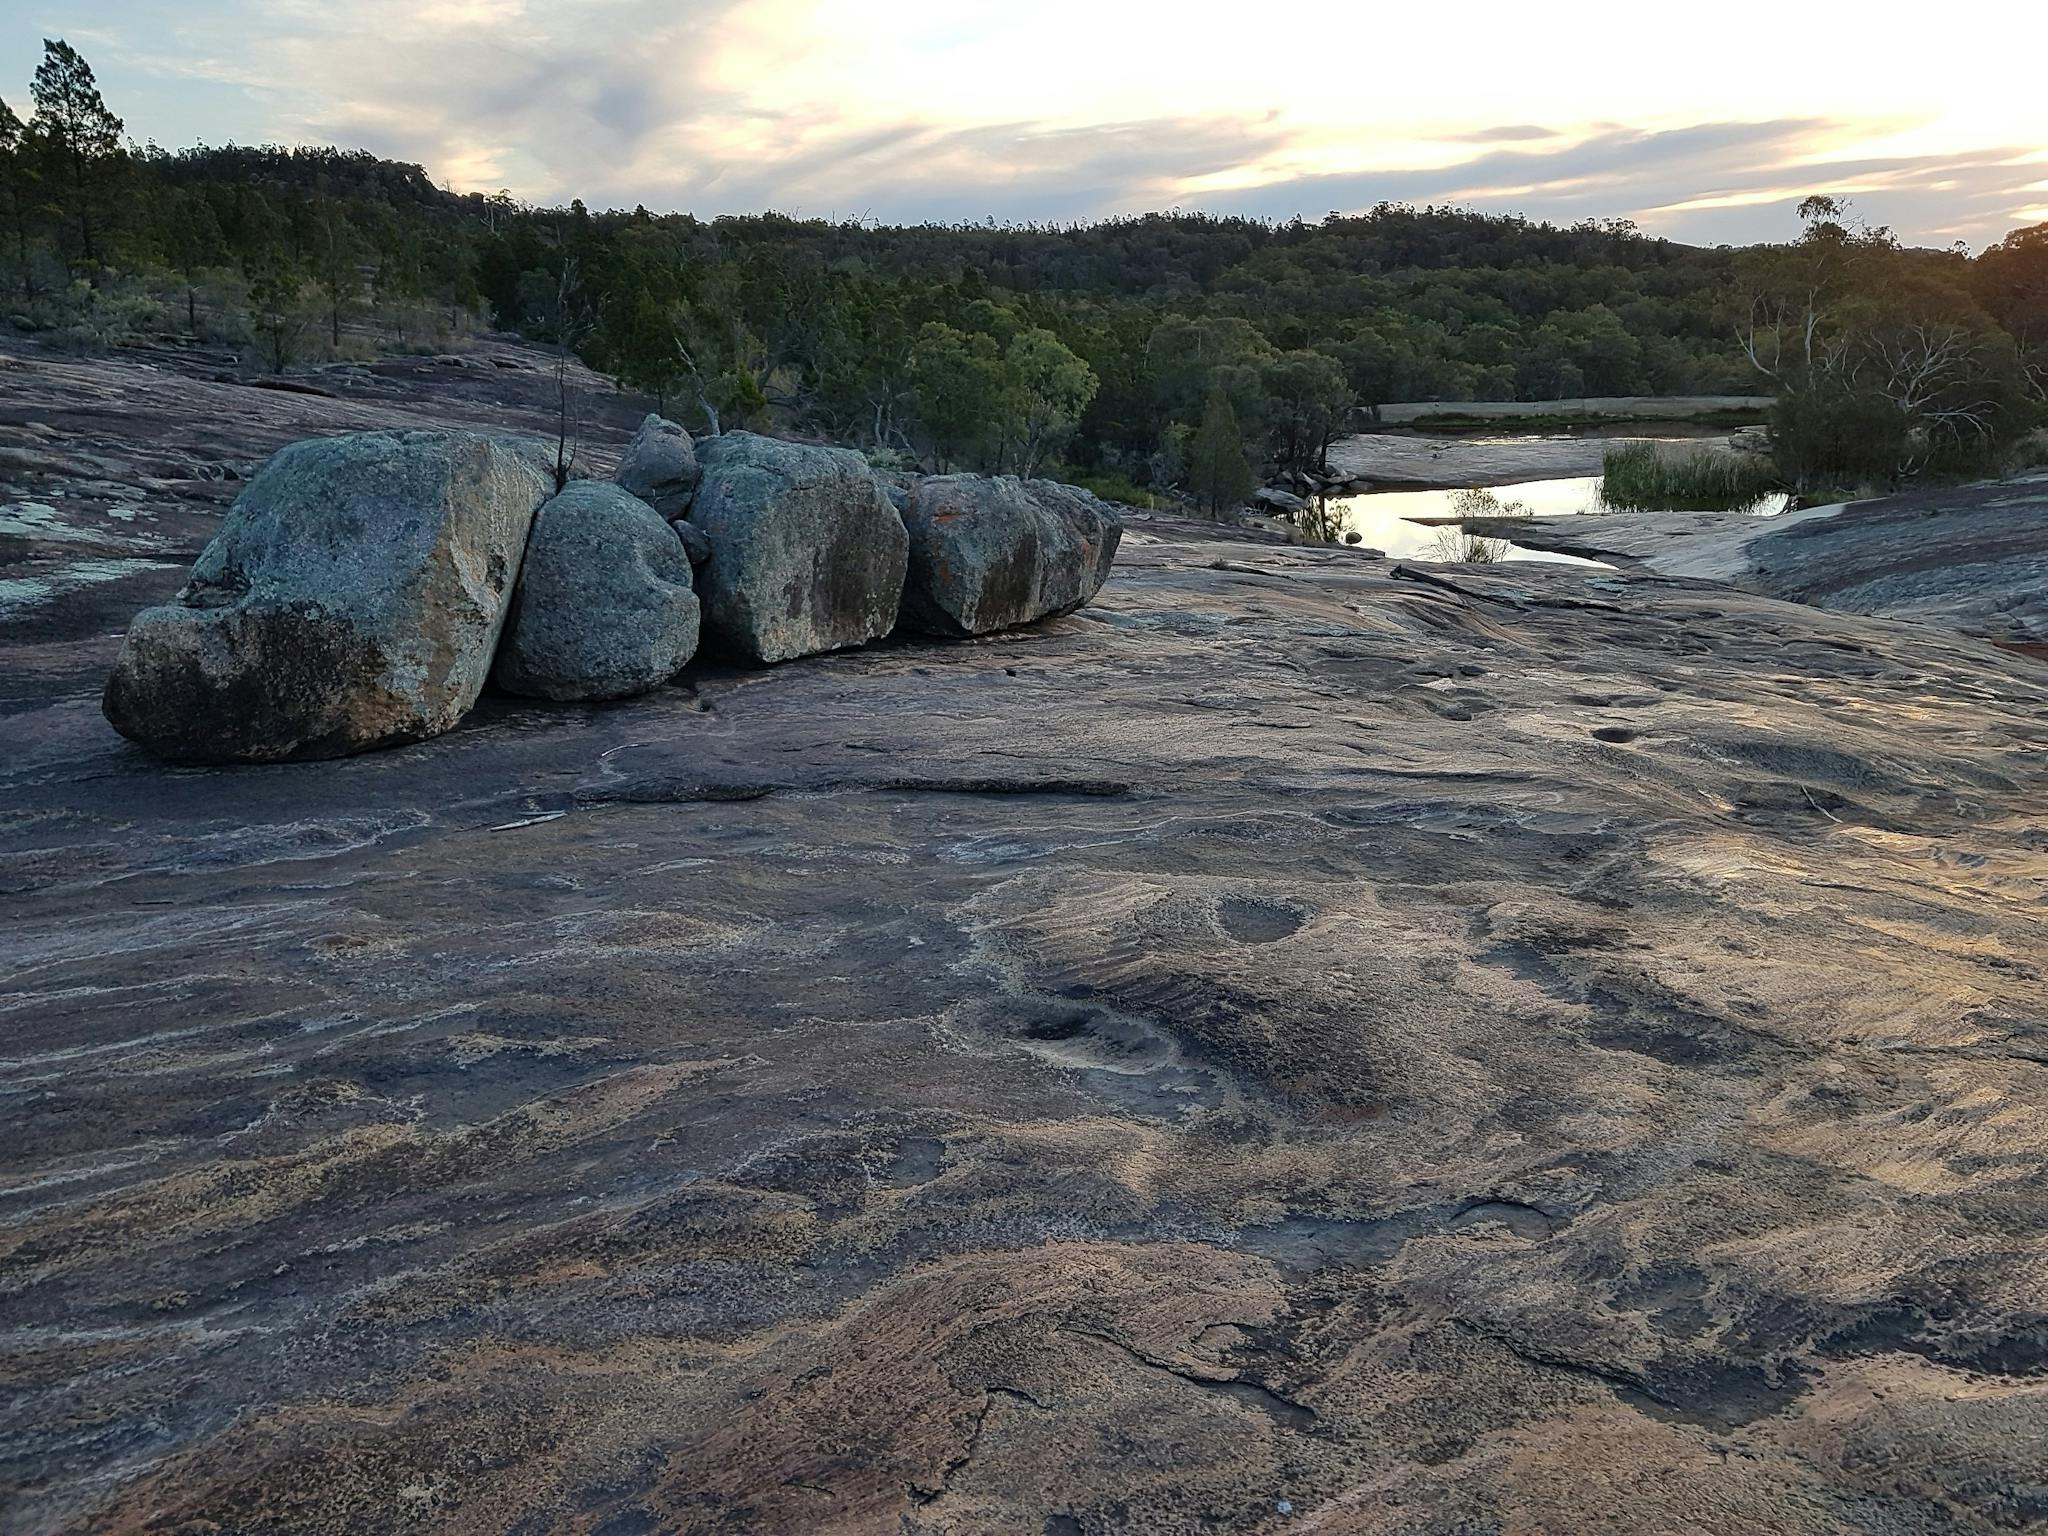 Exposed areas of granite, with large boulders. Water cascades after rain.